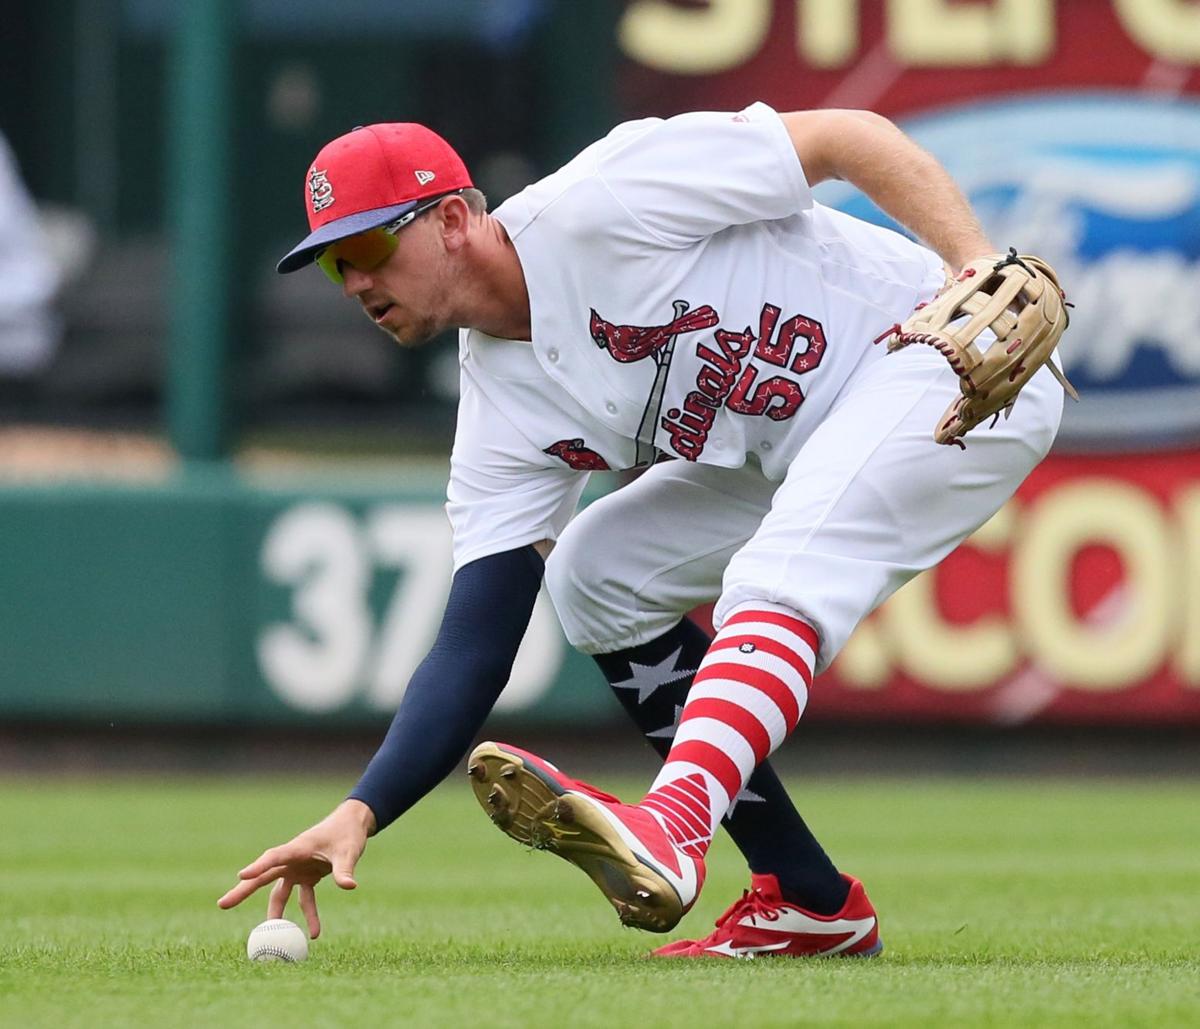 WILL PISCOTTY BE TRADED? | Sports | 0